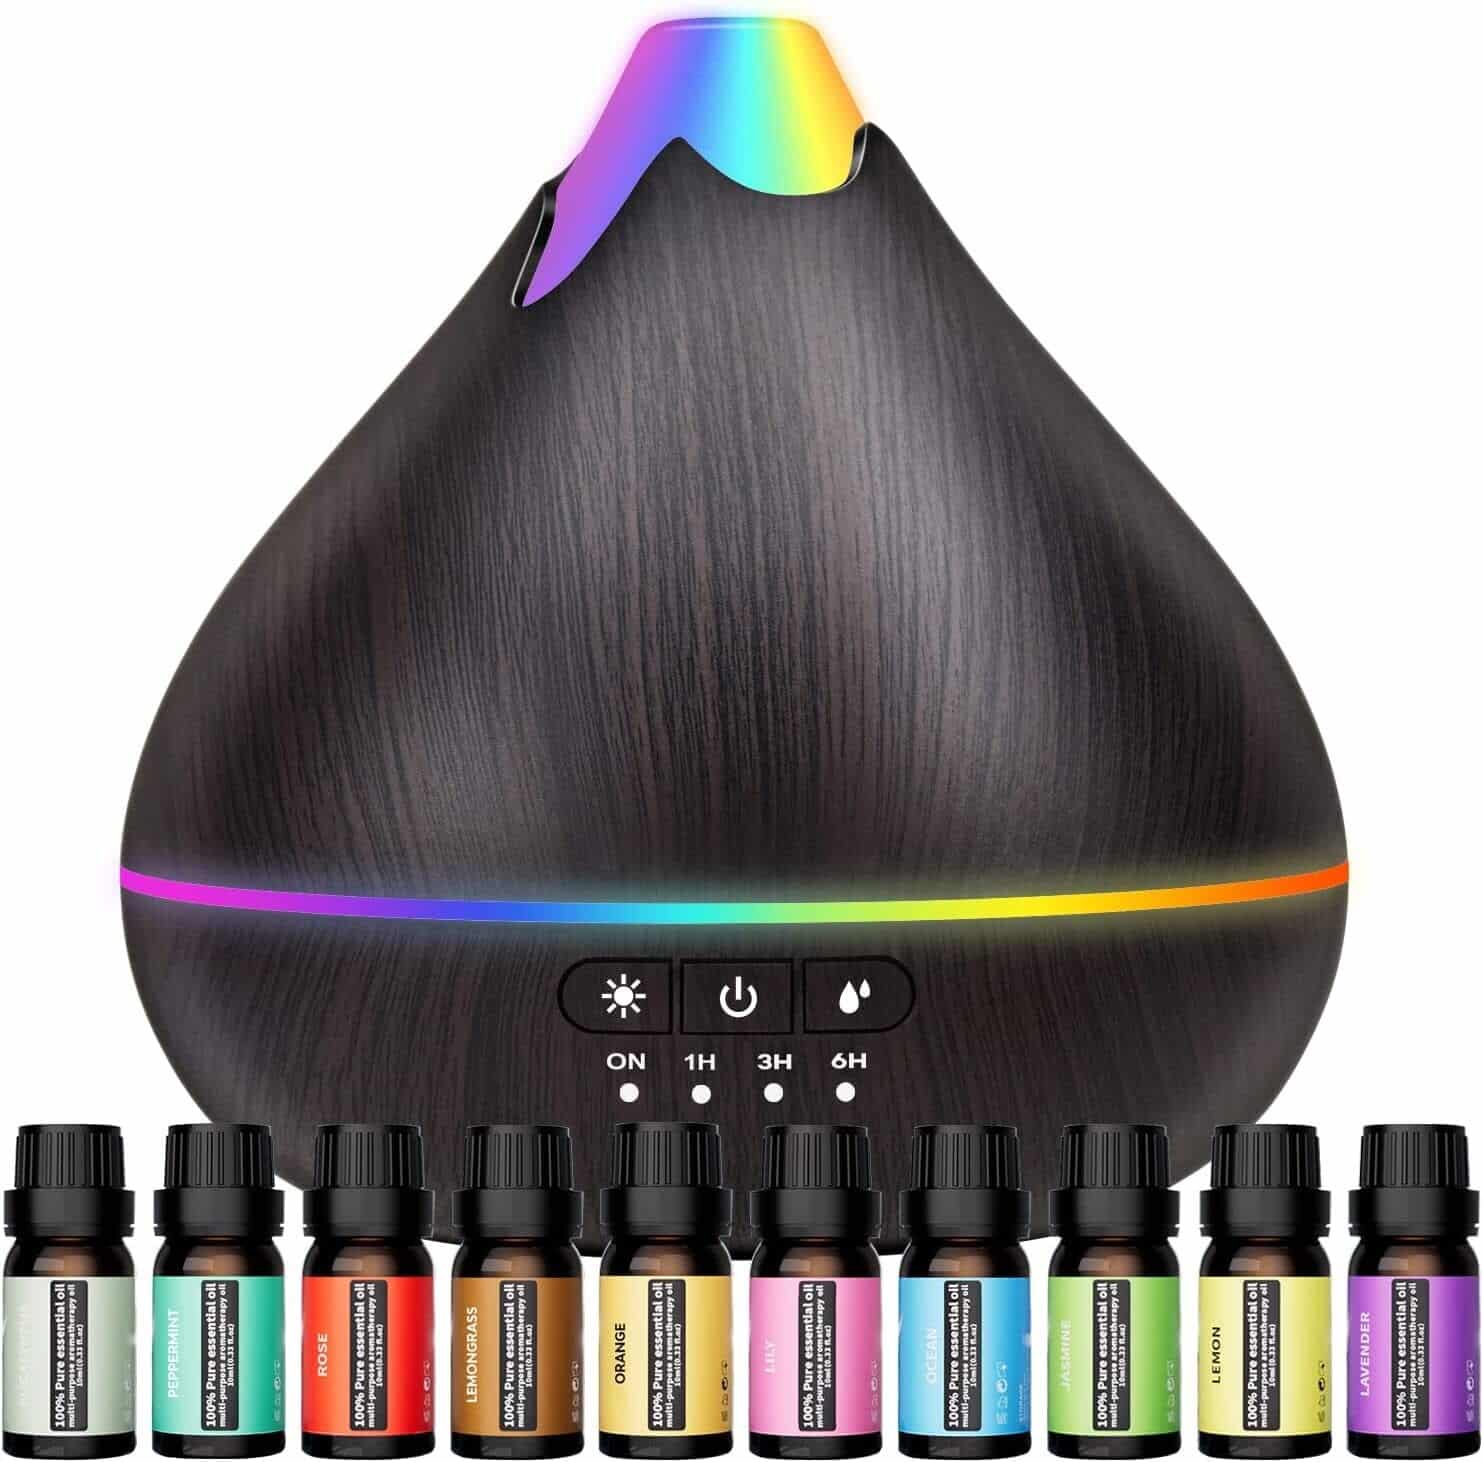 A picture of an essential oil diffuser